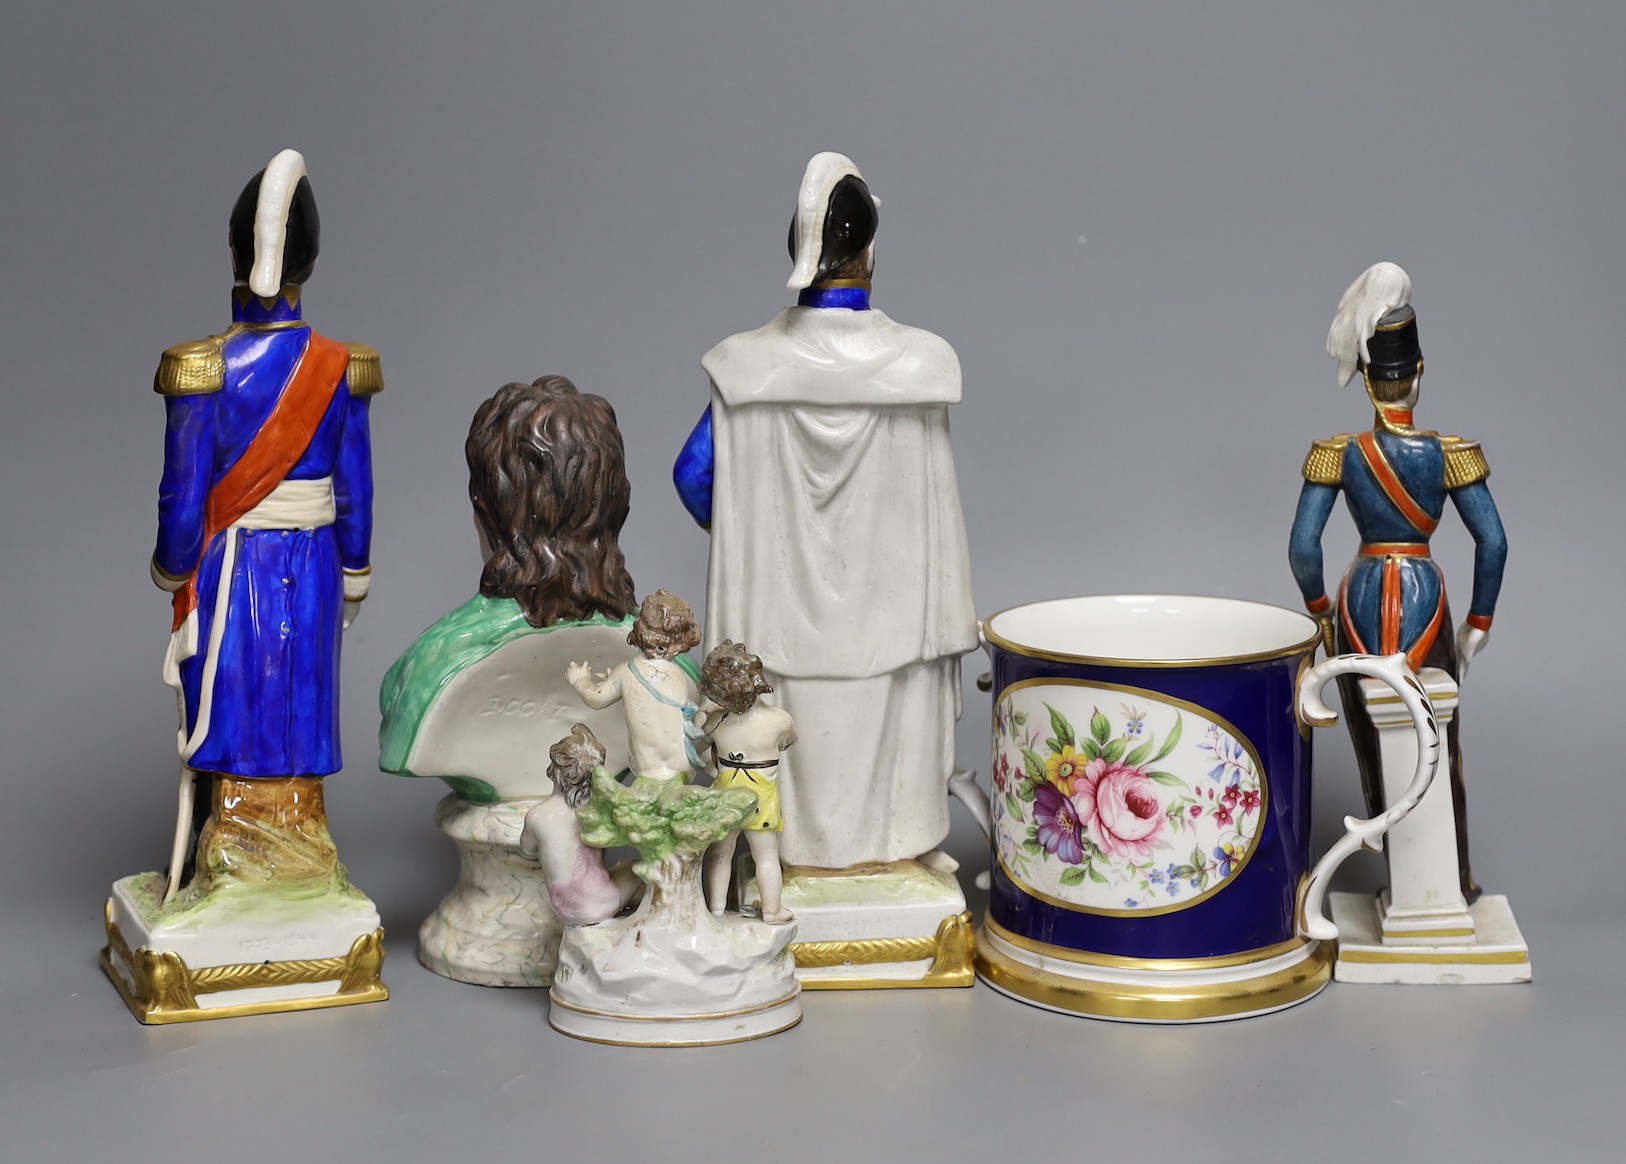 A Staffordshire bust inscribed Locke and three military figures, a two handled tankard and a cherub group, bust 19cms high